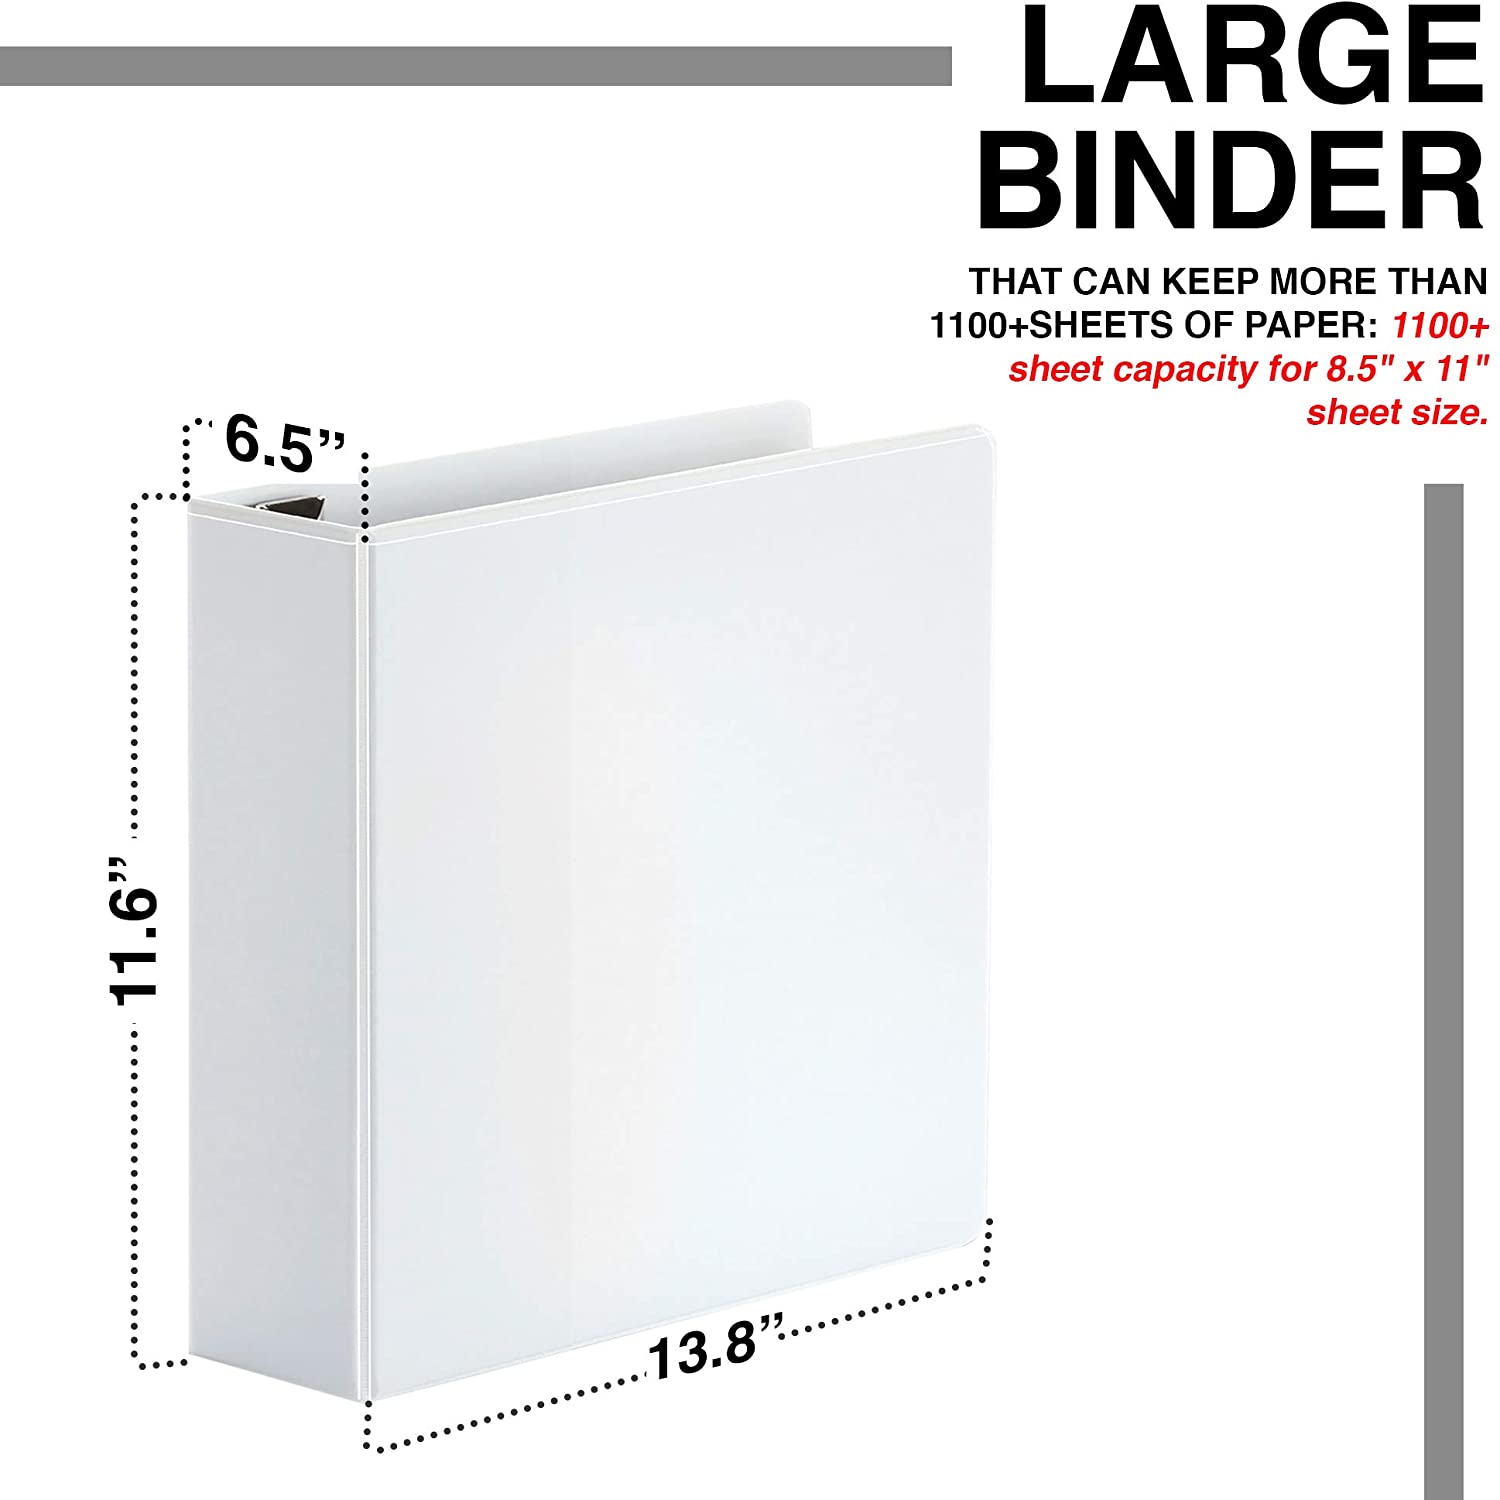 3 Ring Binder, Slant D-Rings, Clear View, Pockets (6 inch, White)